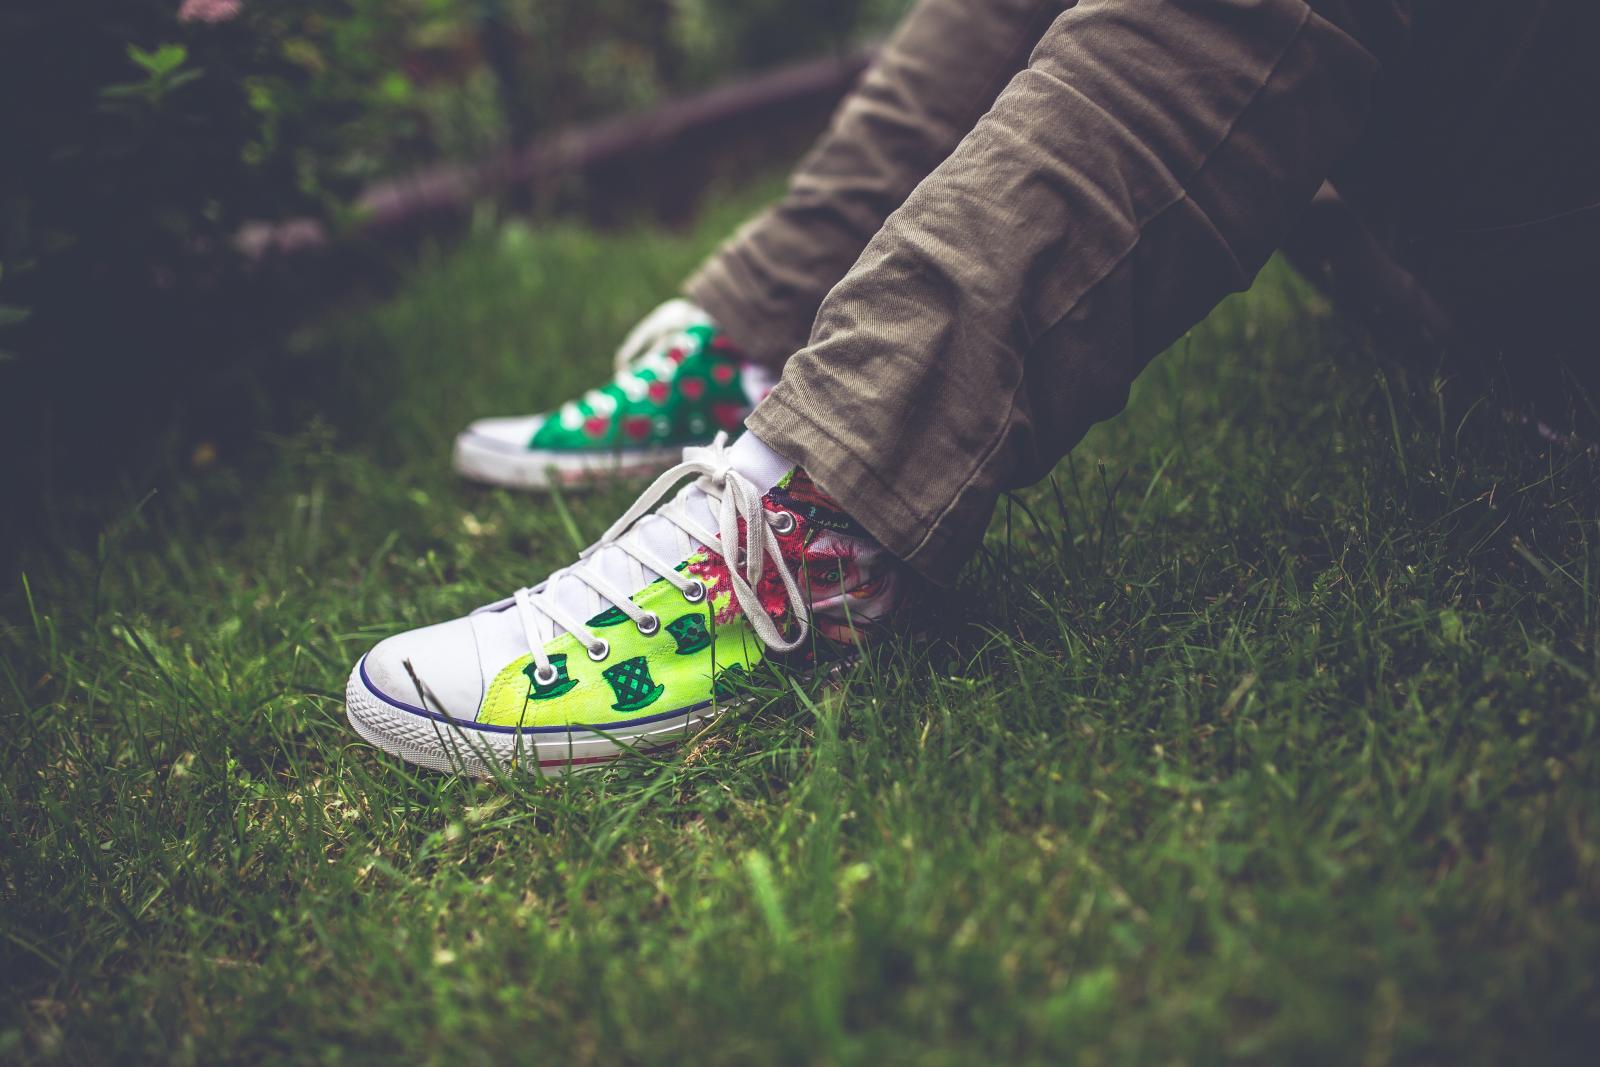 Teenager on grass. Photo credit: Pexels